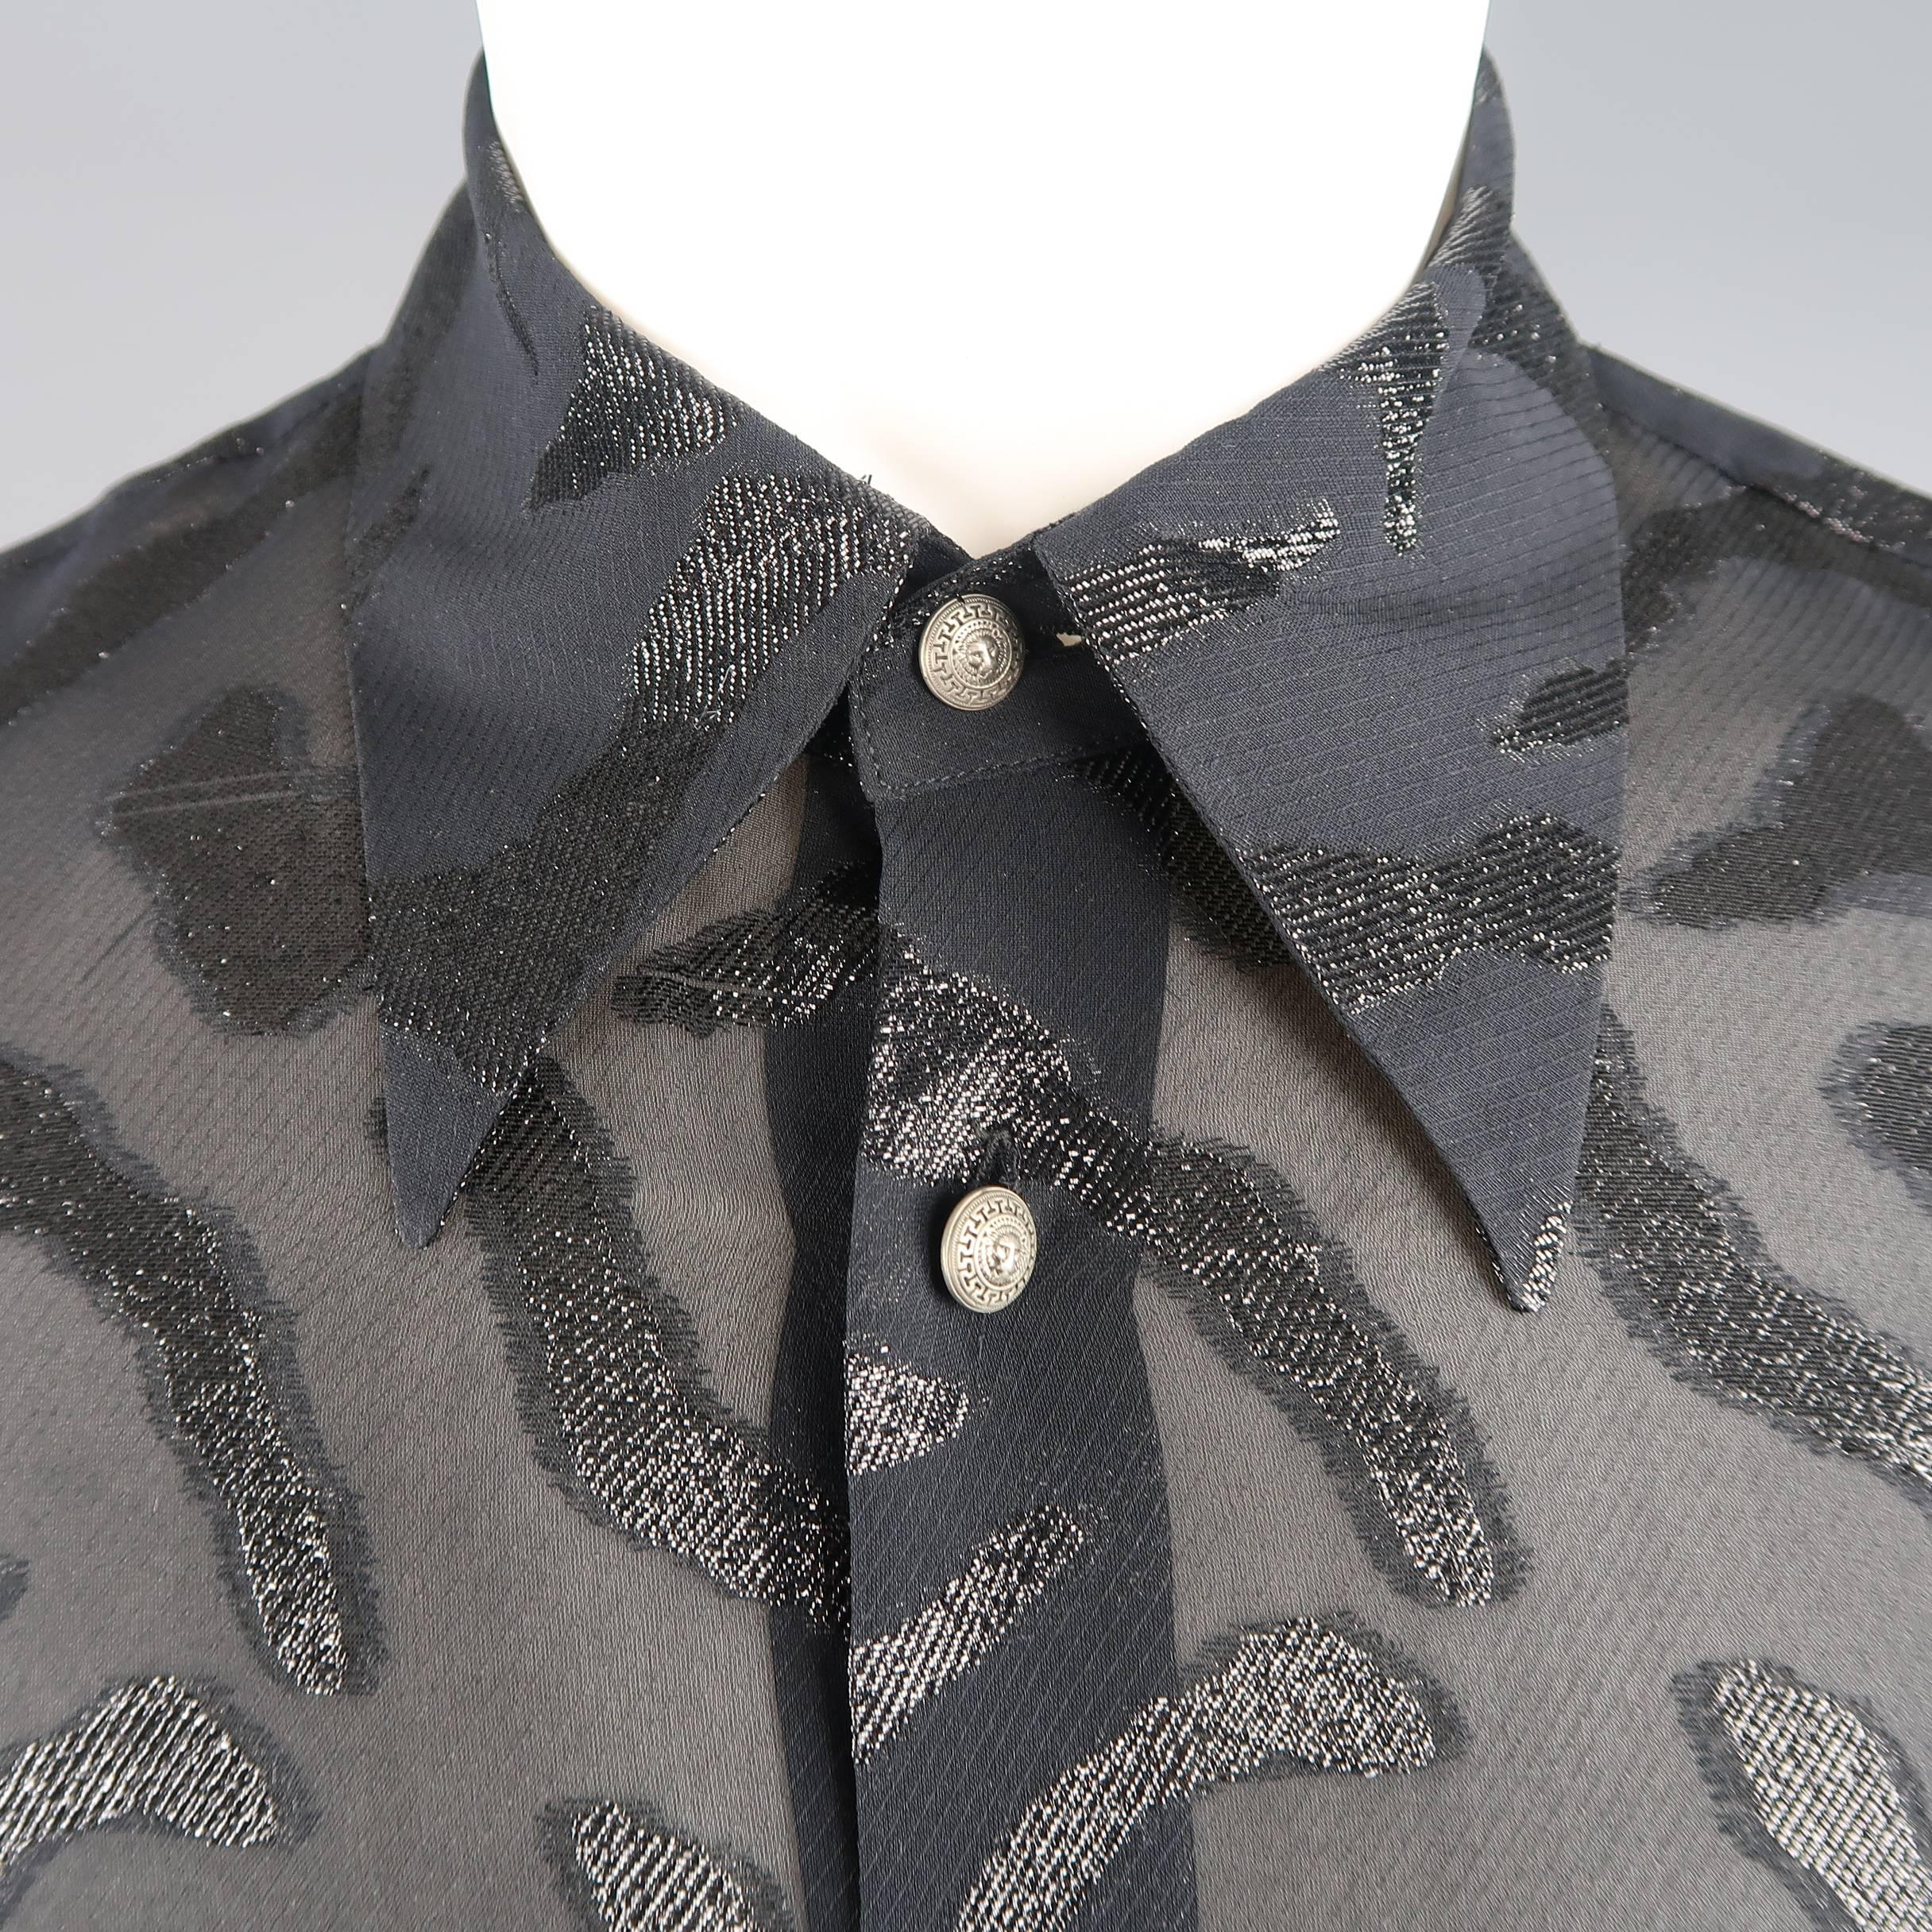 Vintage VERSUS by GIANNI VERSACE shirt comes in a black silk blend chiffon with all over metallic tiger burnout effect print with a pointed collar and silver tone lion head buttons. Minor wear. Made in Italy.
 
Good Pre-Owned Condition.
Marked: